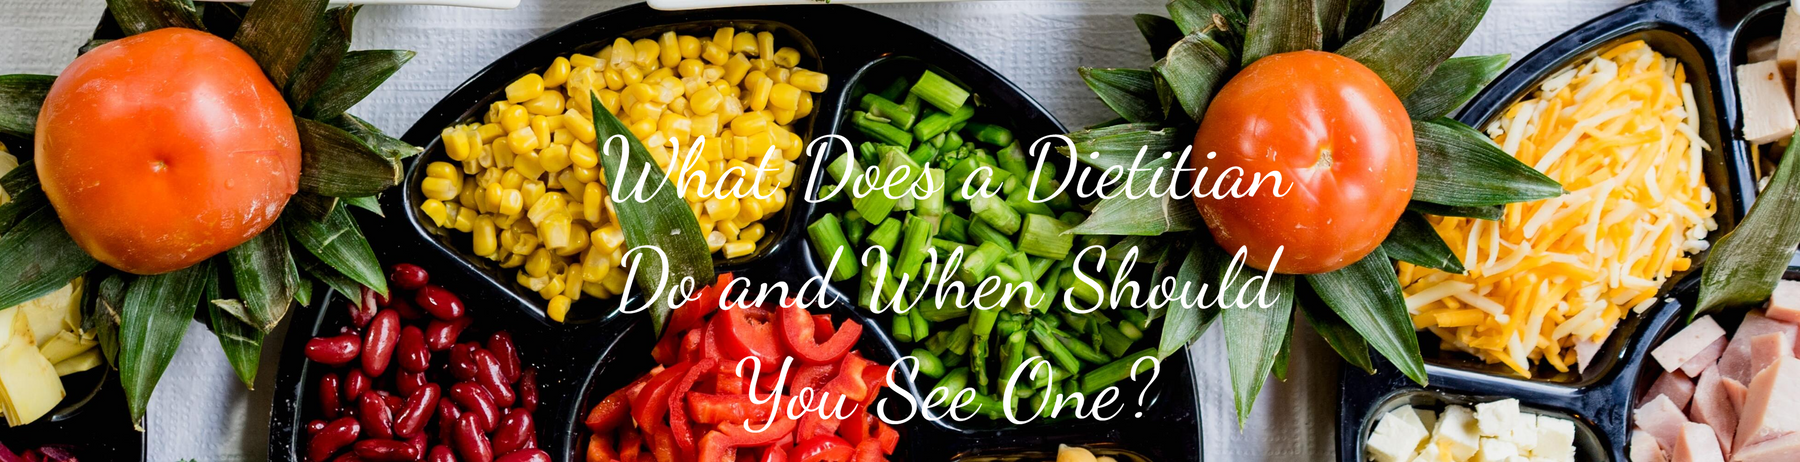 What Does a Dietitian Do and When Should You See One?